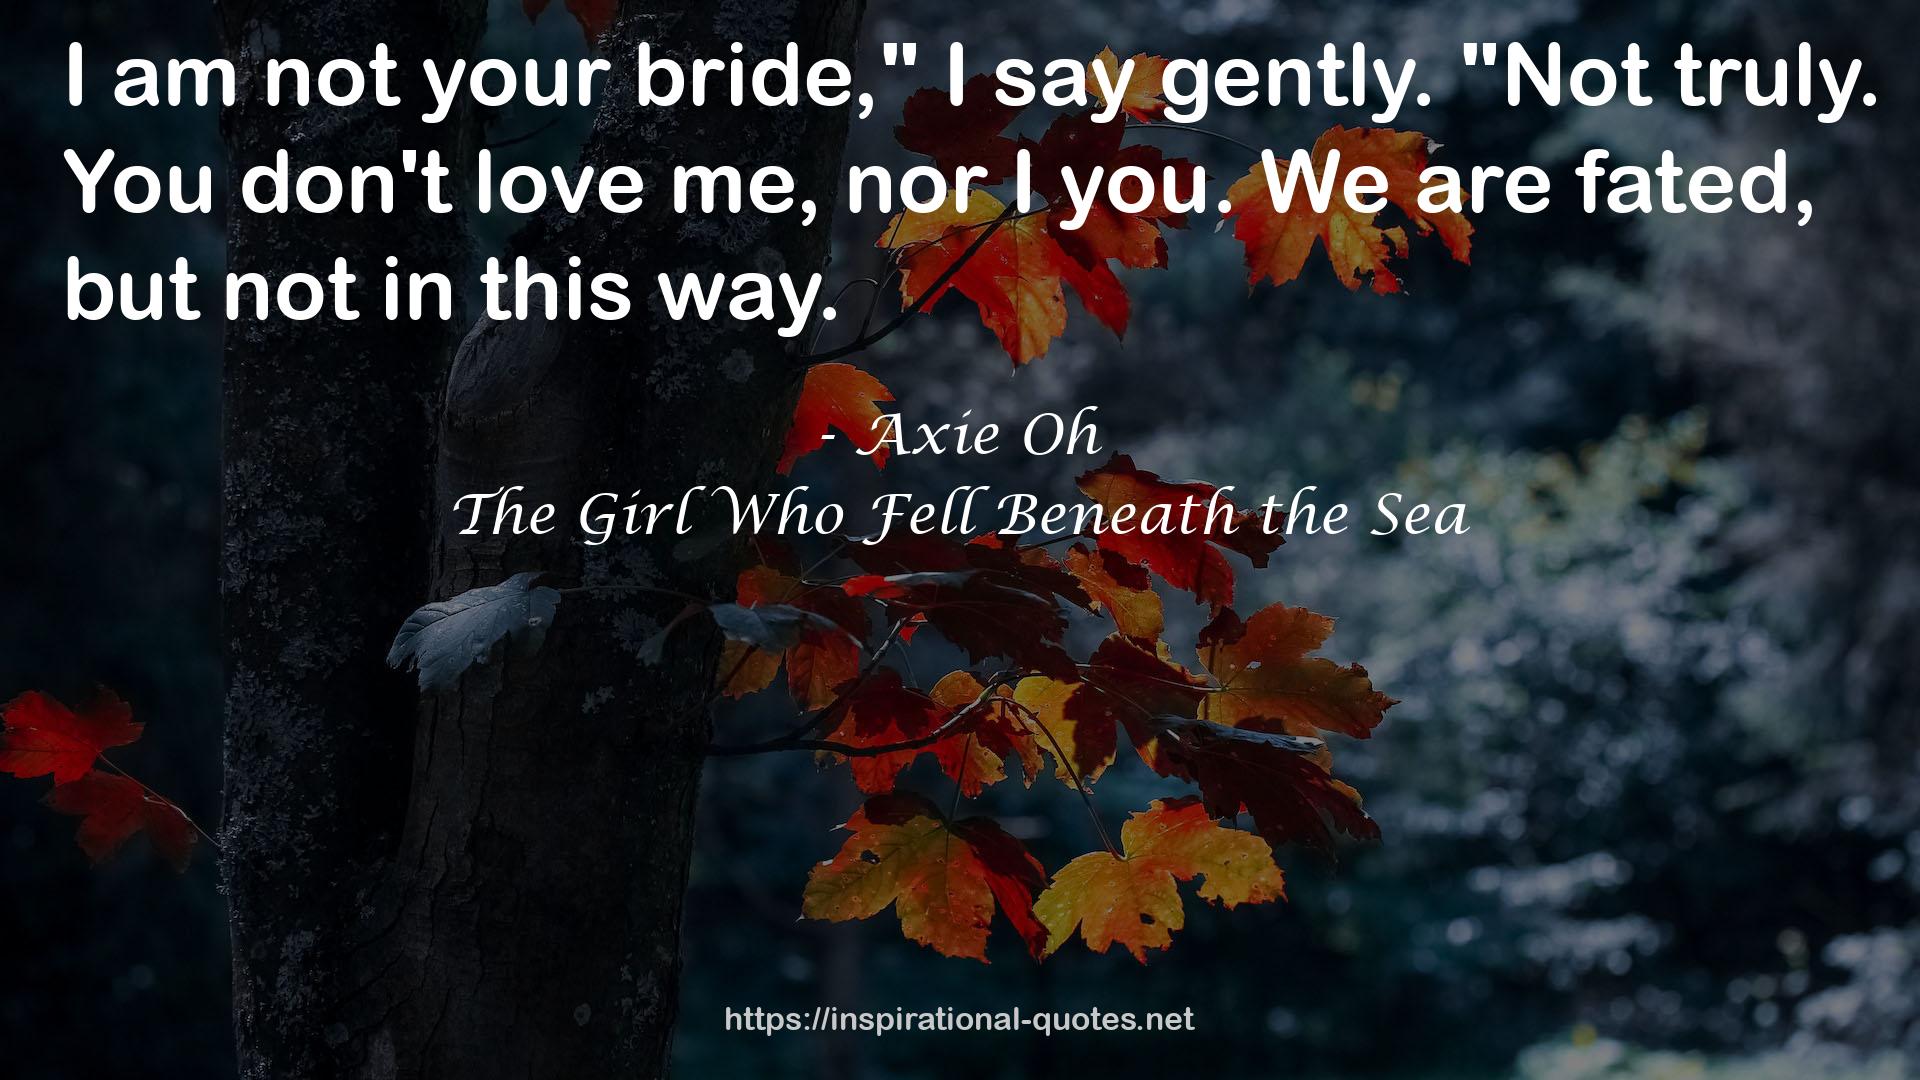 The Girl Who Fell Beneath the Sea QUOTES